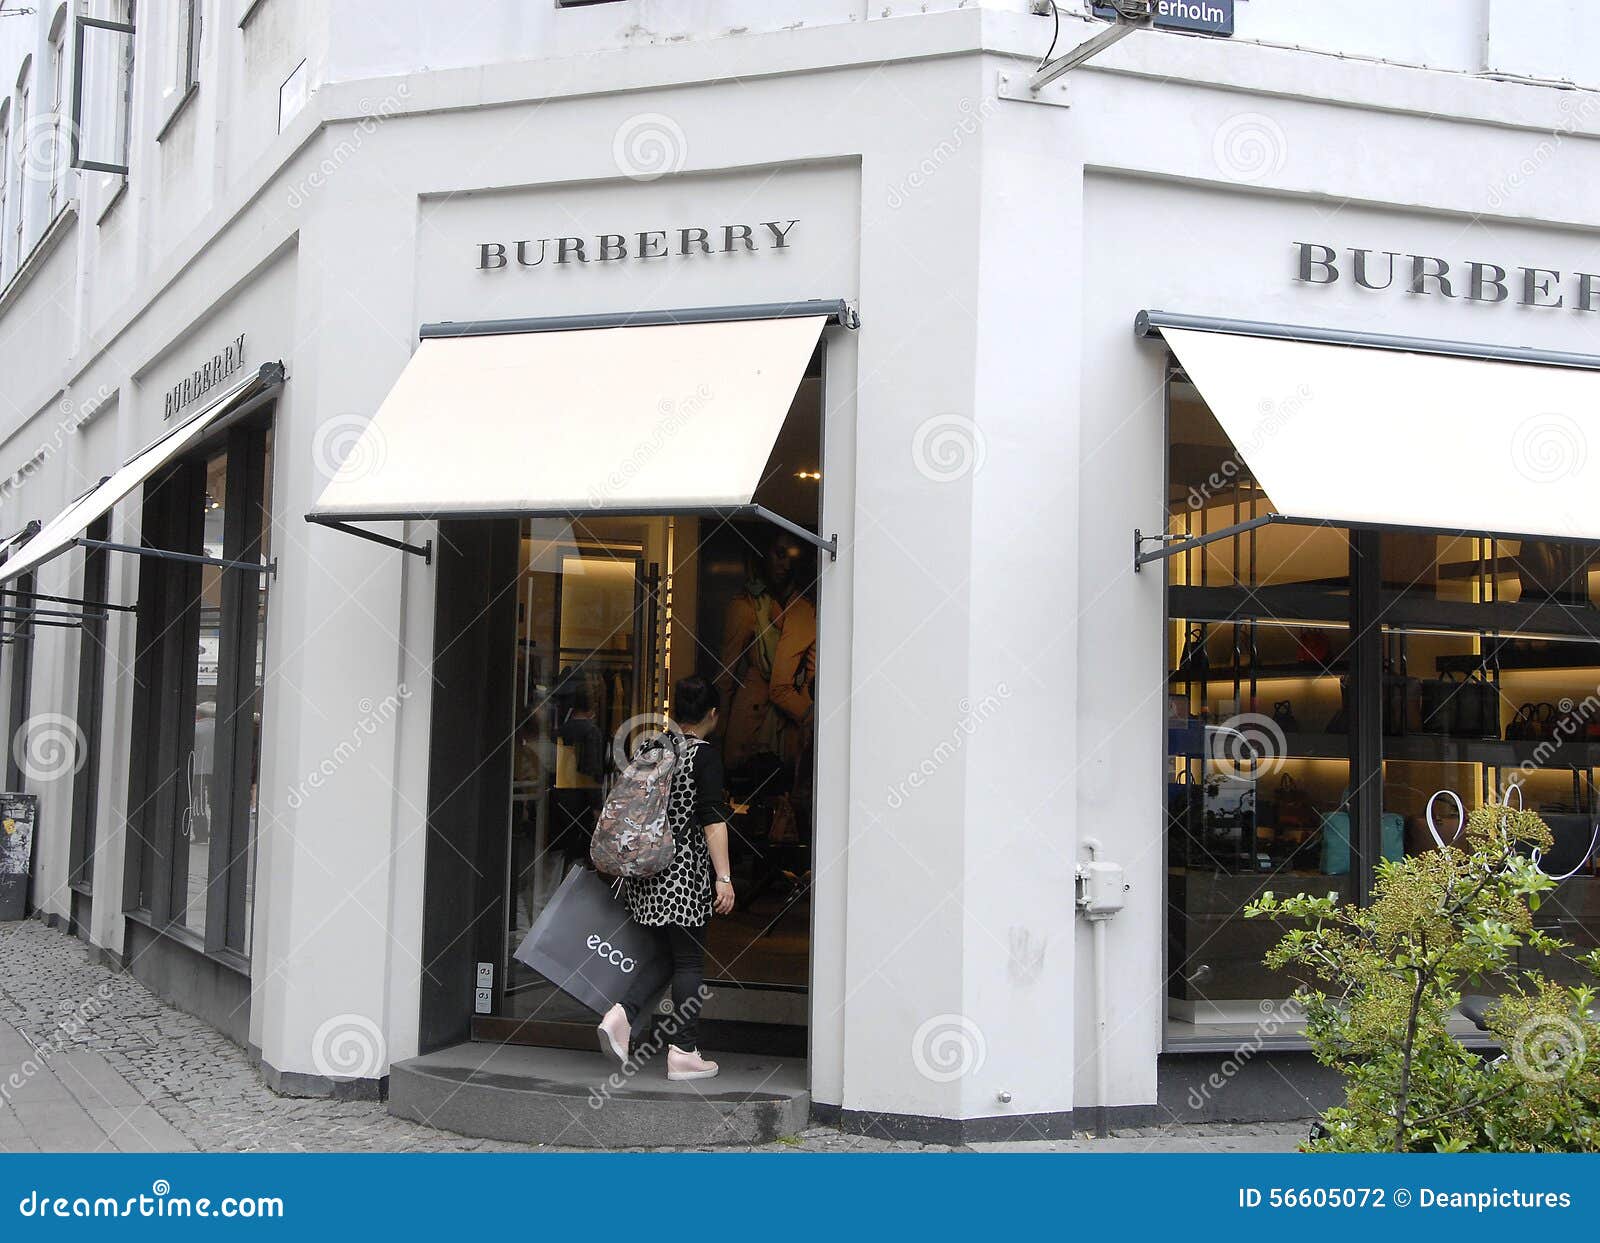 ASIAN SHOPPER ENTERING BURBERRY STORE Editorial Photography - Image of british: 56605072